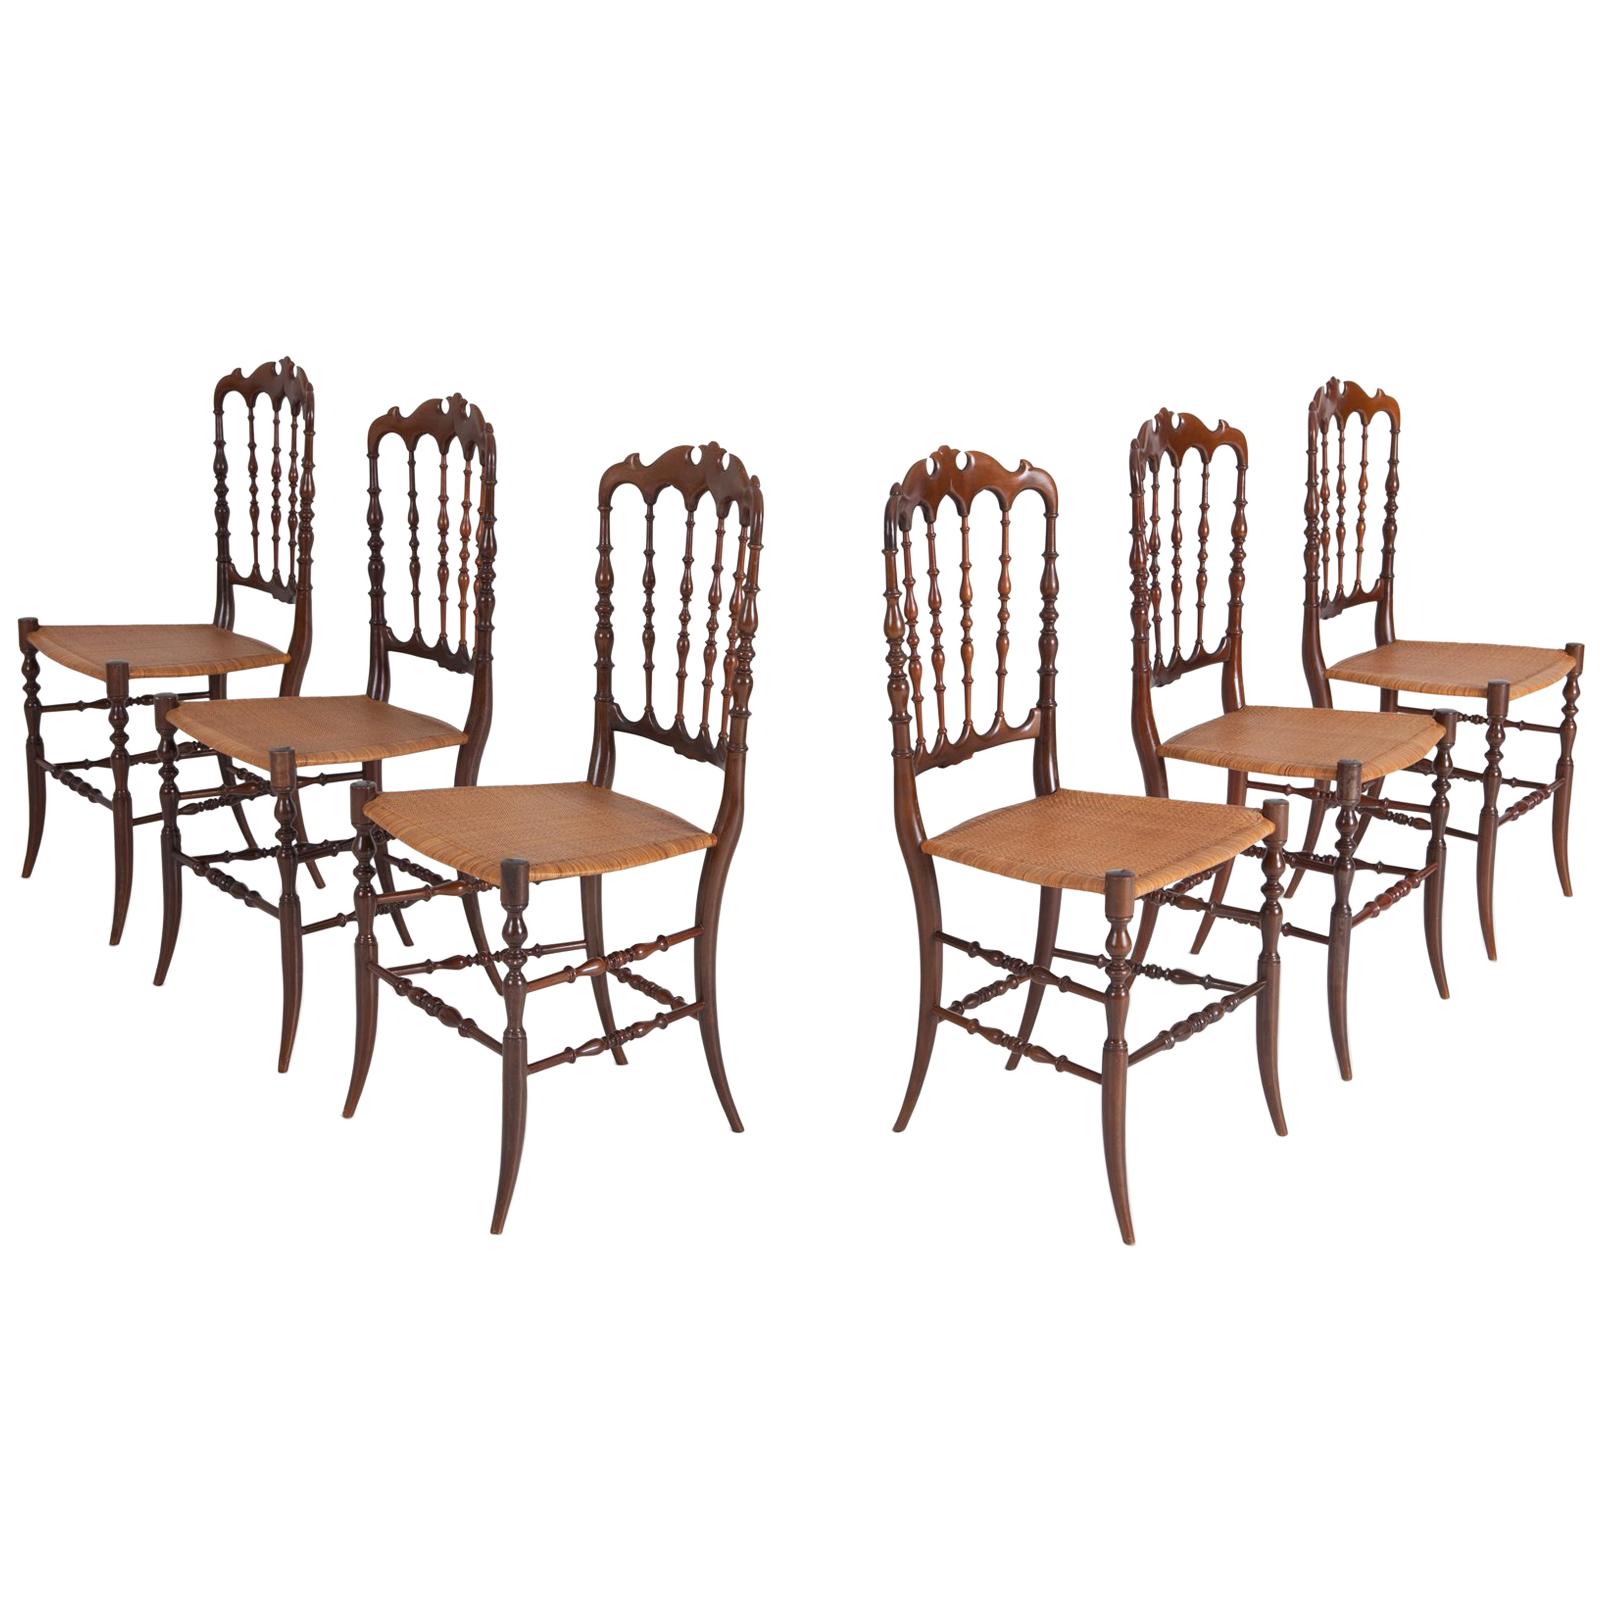 Postmodern dining chairs, set of six, Chiavari, Italy, the 1970s

Reminding of Ponti's ultra leggera, these lightweight dining chairs incorporate both a classical look with a modern design.
Provided with a beautiful crest rail, spindled back, and